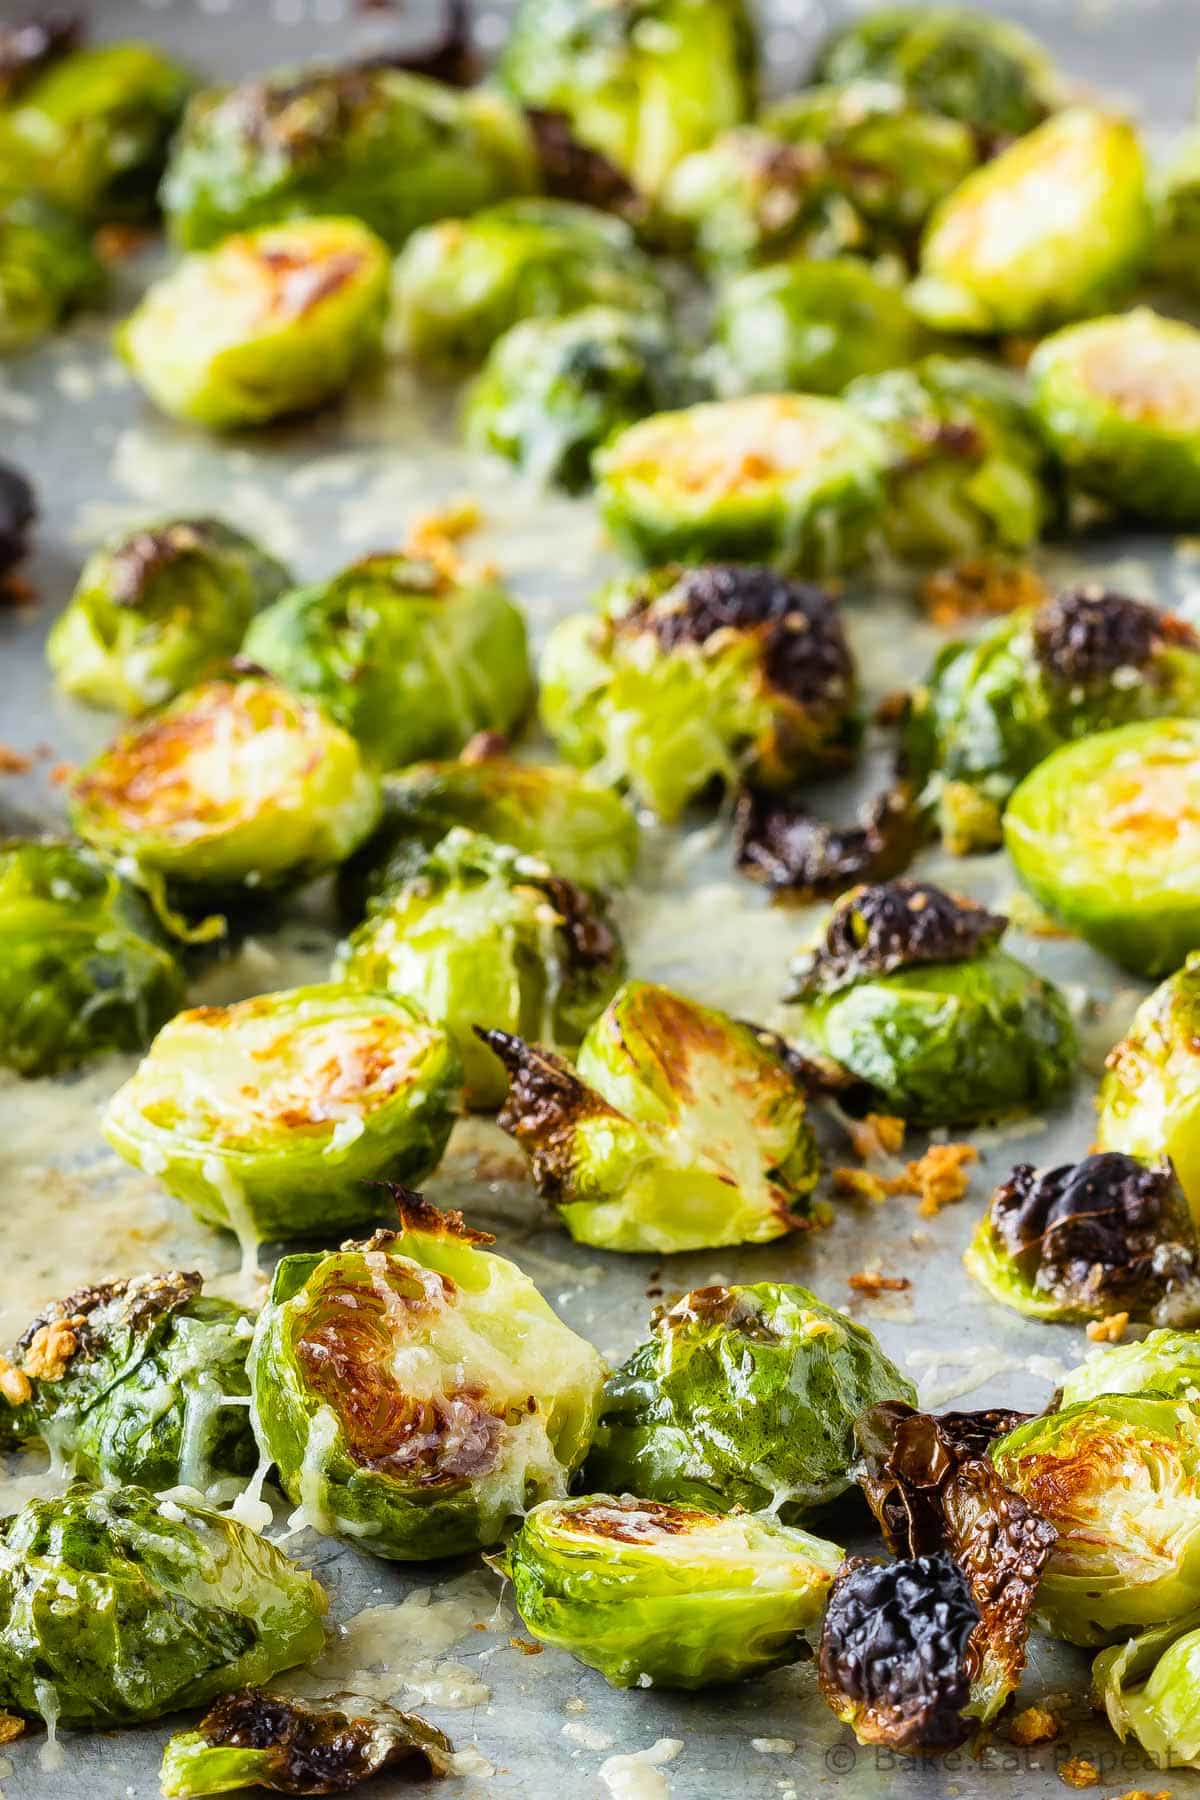 Garlic Parmesan Roasted Brussel Sprouts - Bake. Eat. Repeat.